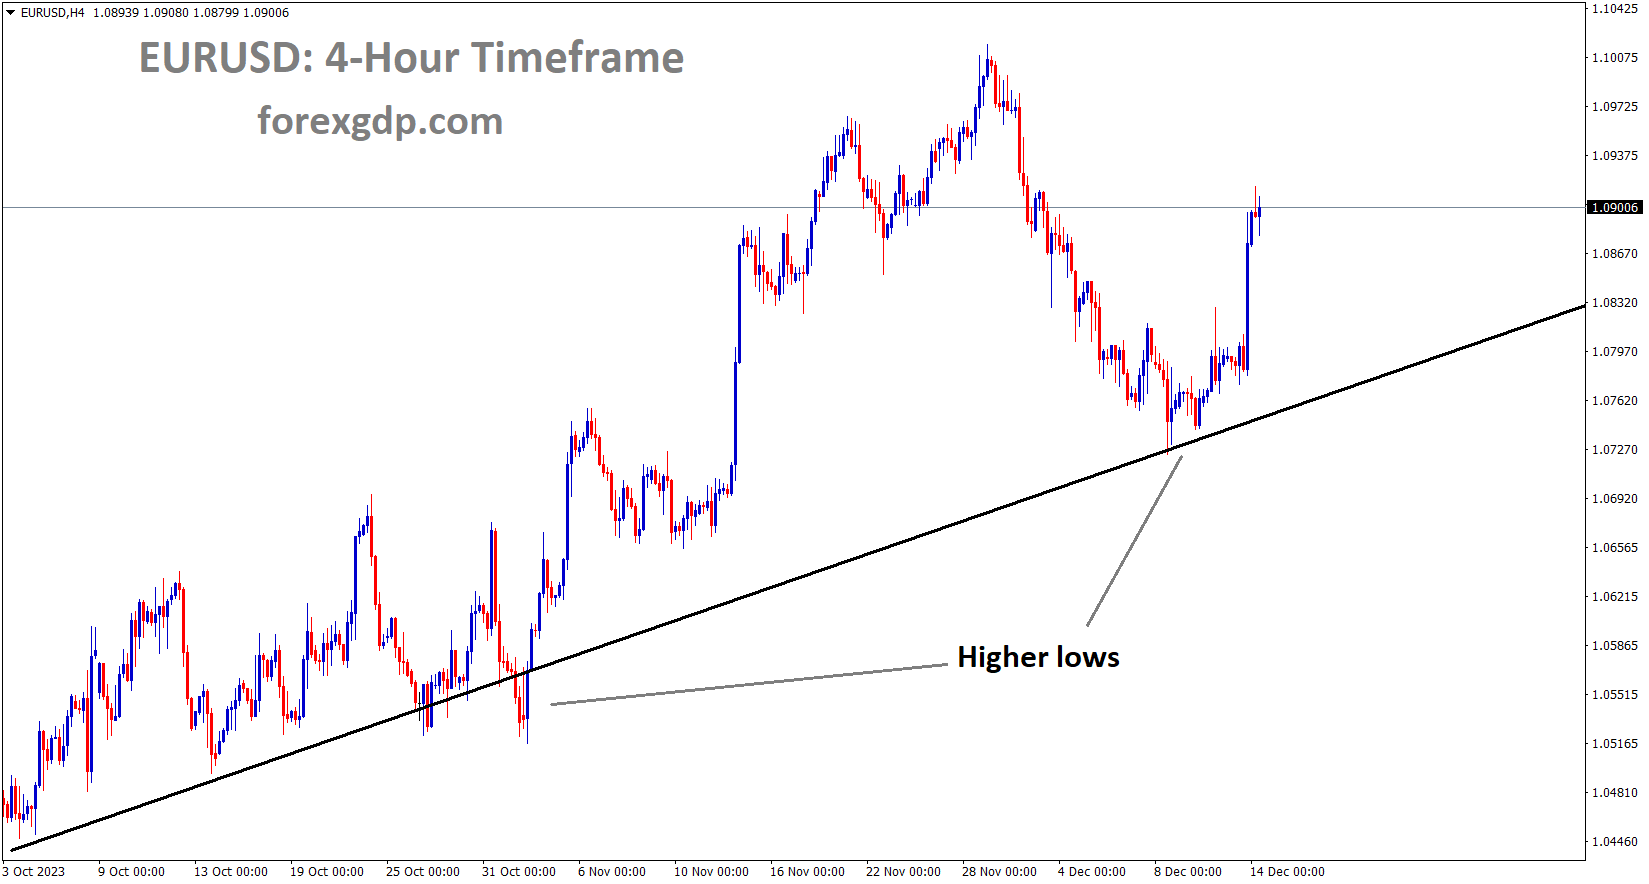 EURUSD is moving in an Uptrend line and the market has rebounded from the higher low area of the trend line